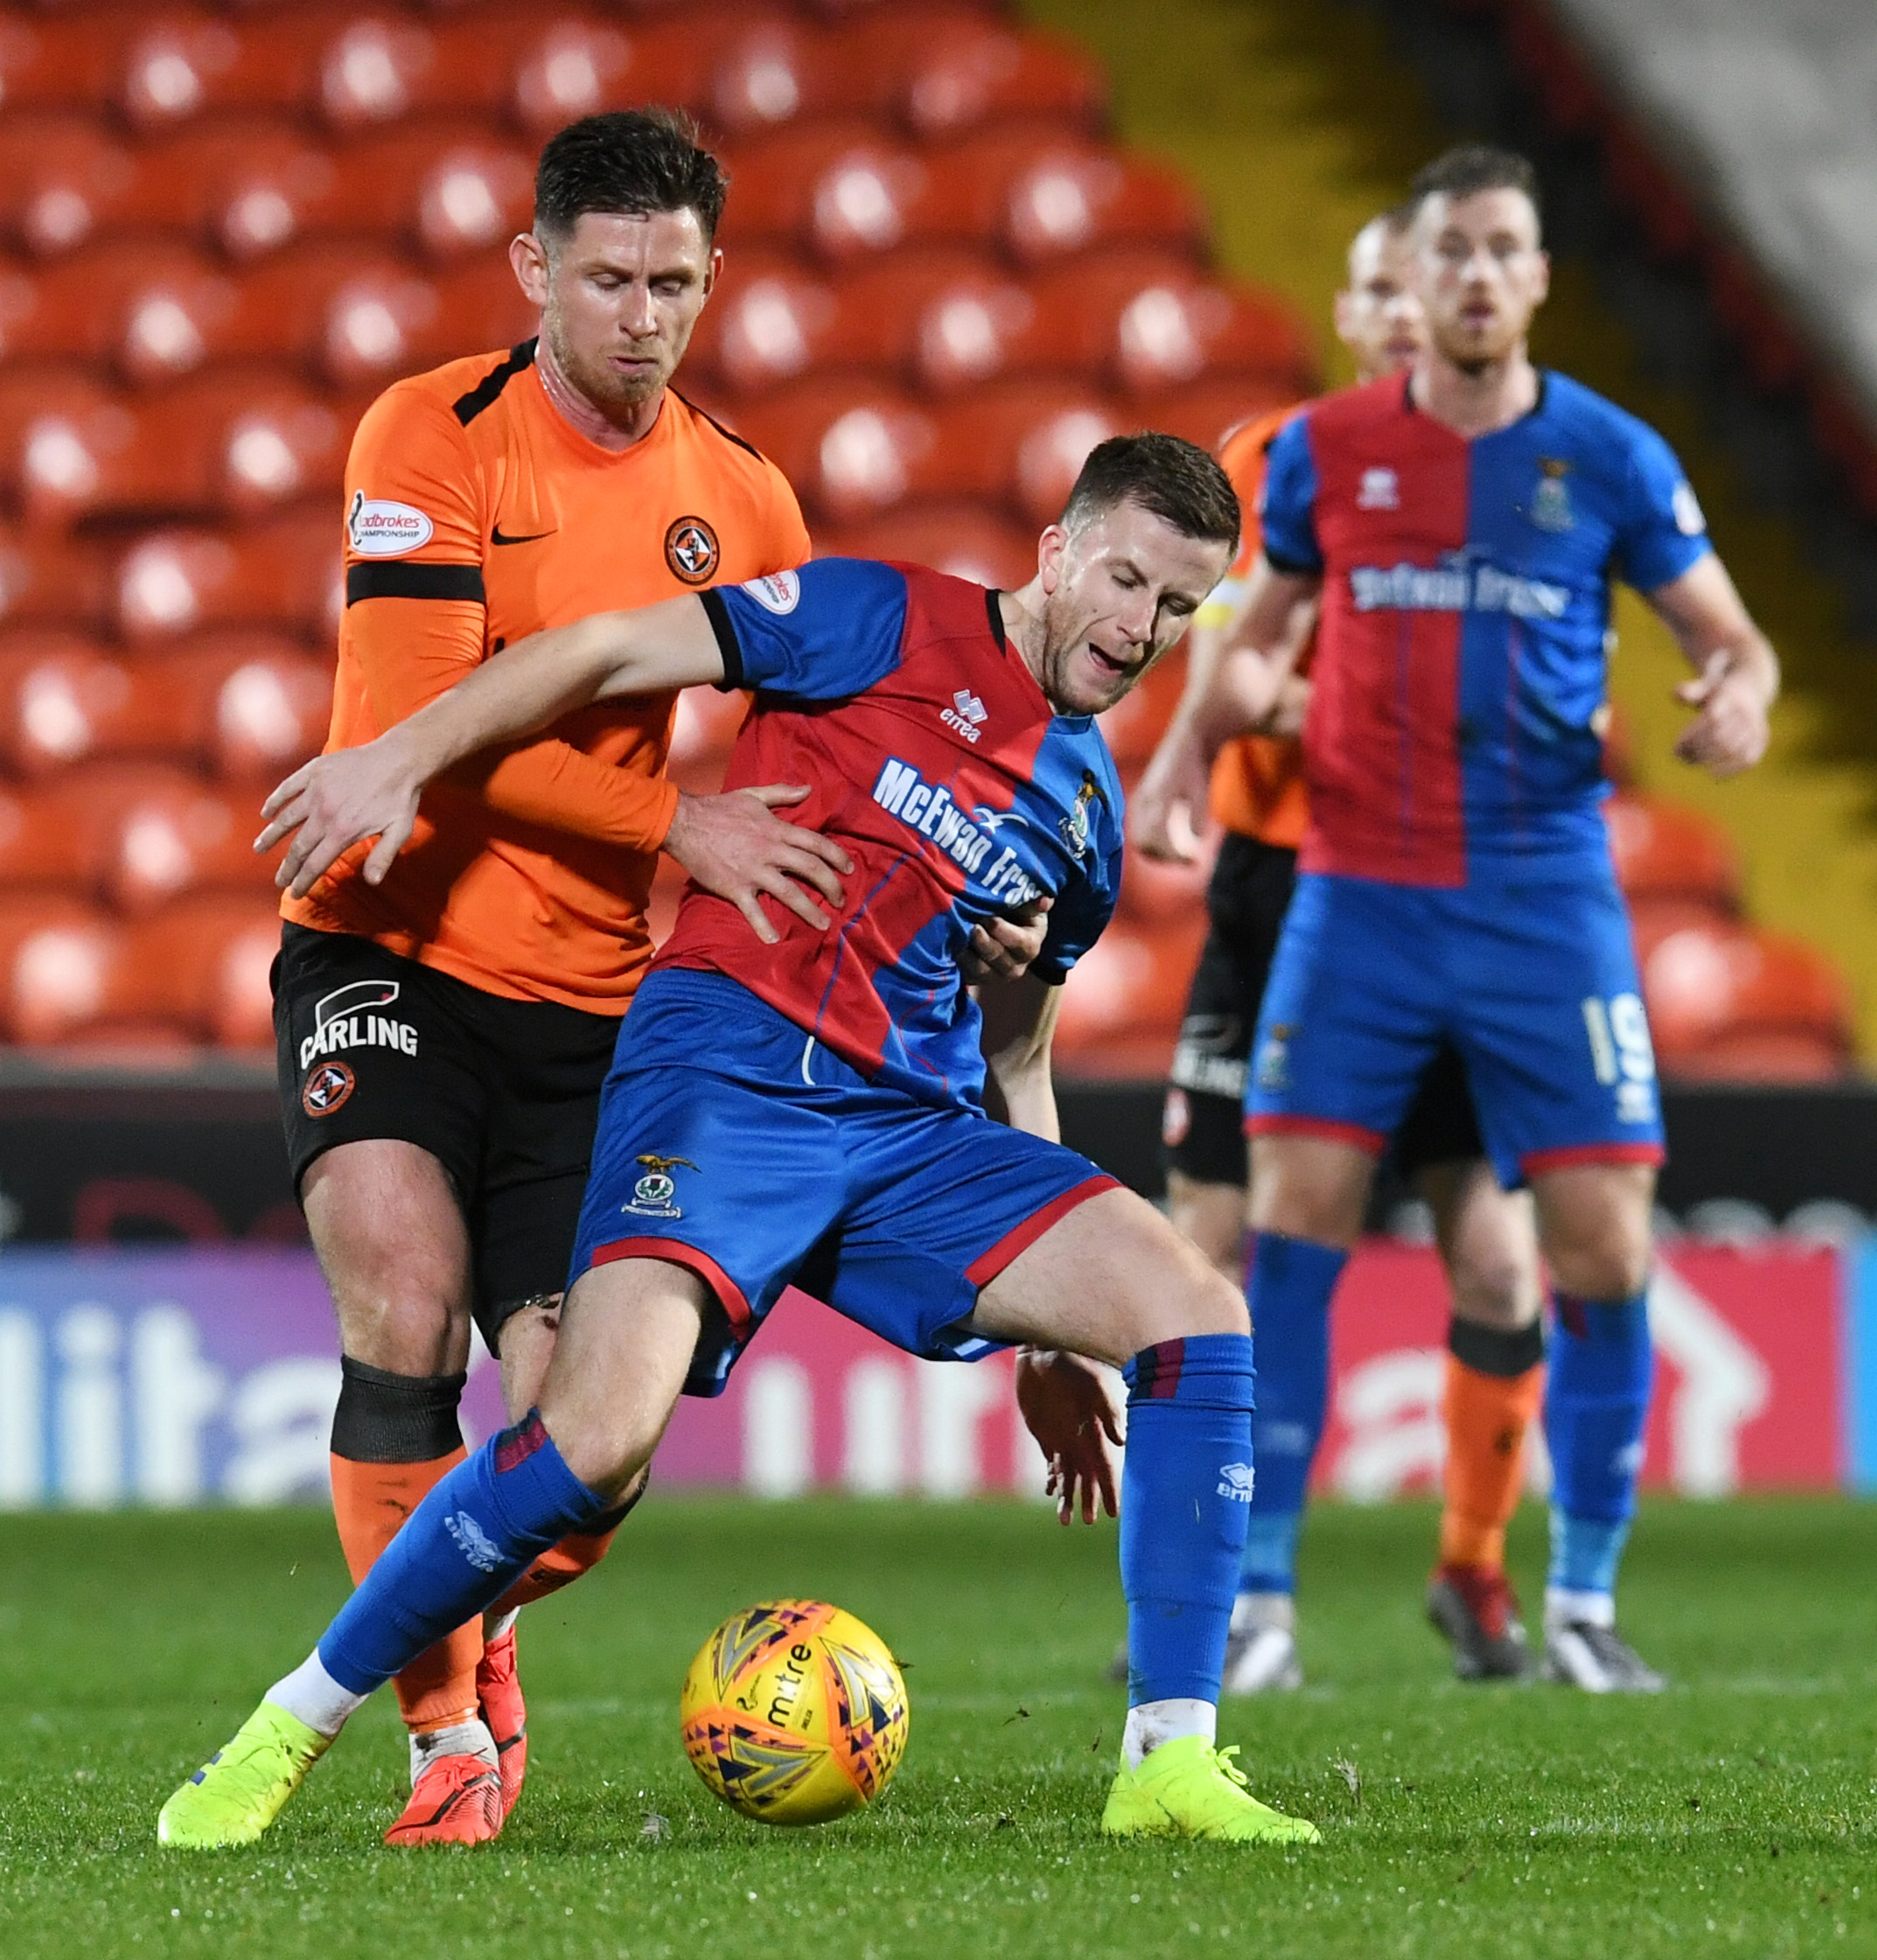 Caley Thistle midfielder Liam Polworth holds off Dundee United's Callum Butcher